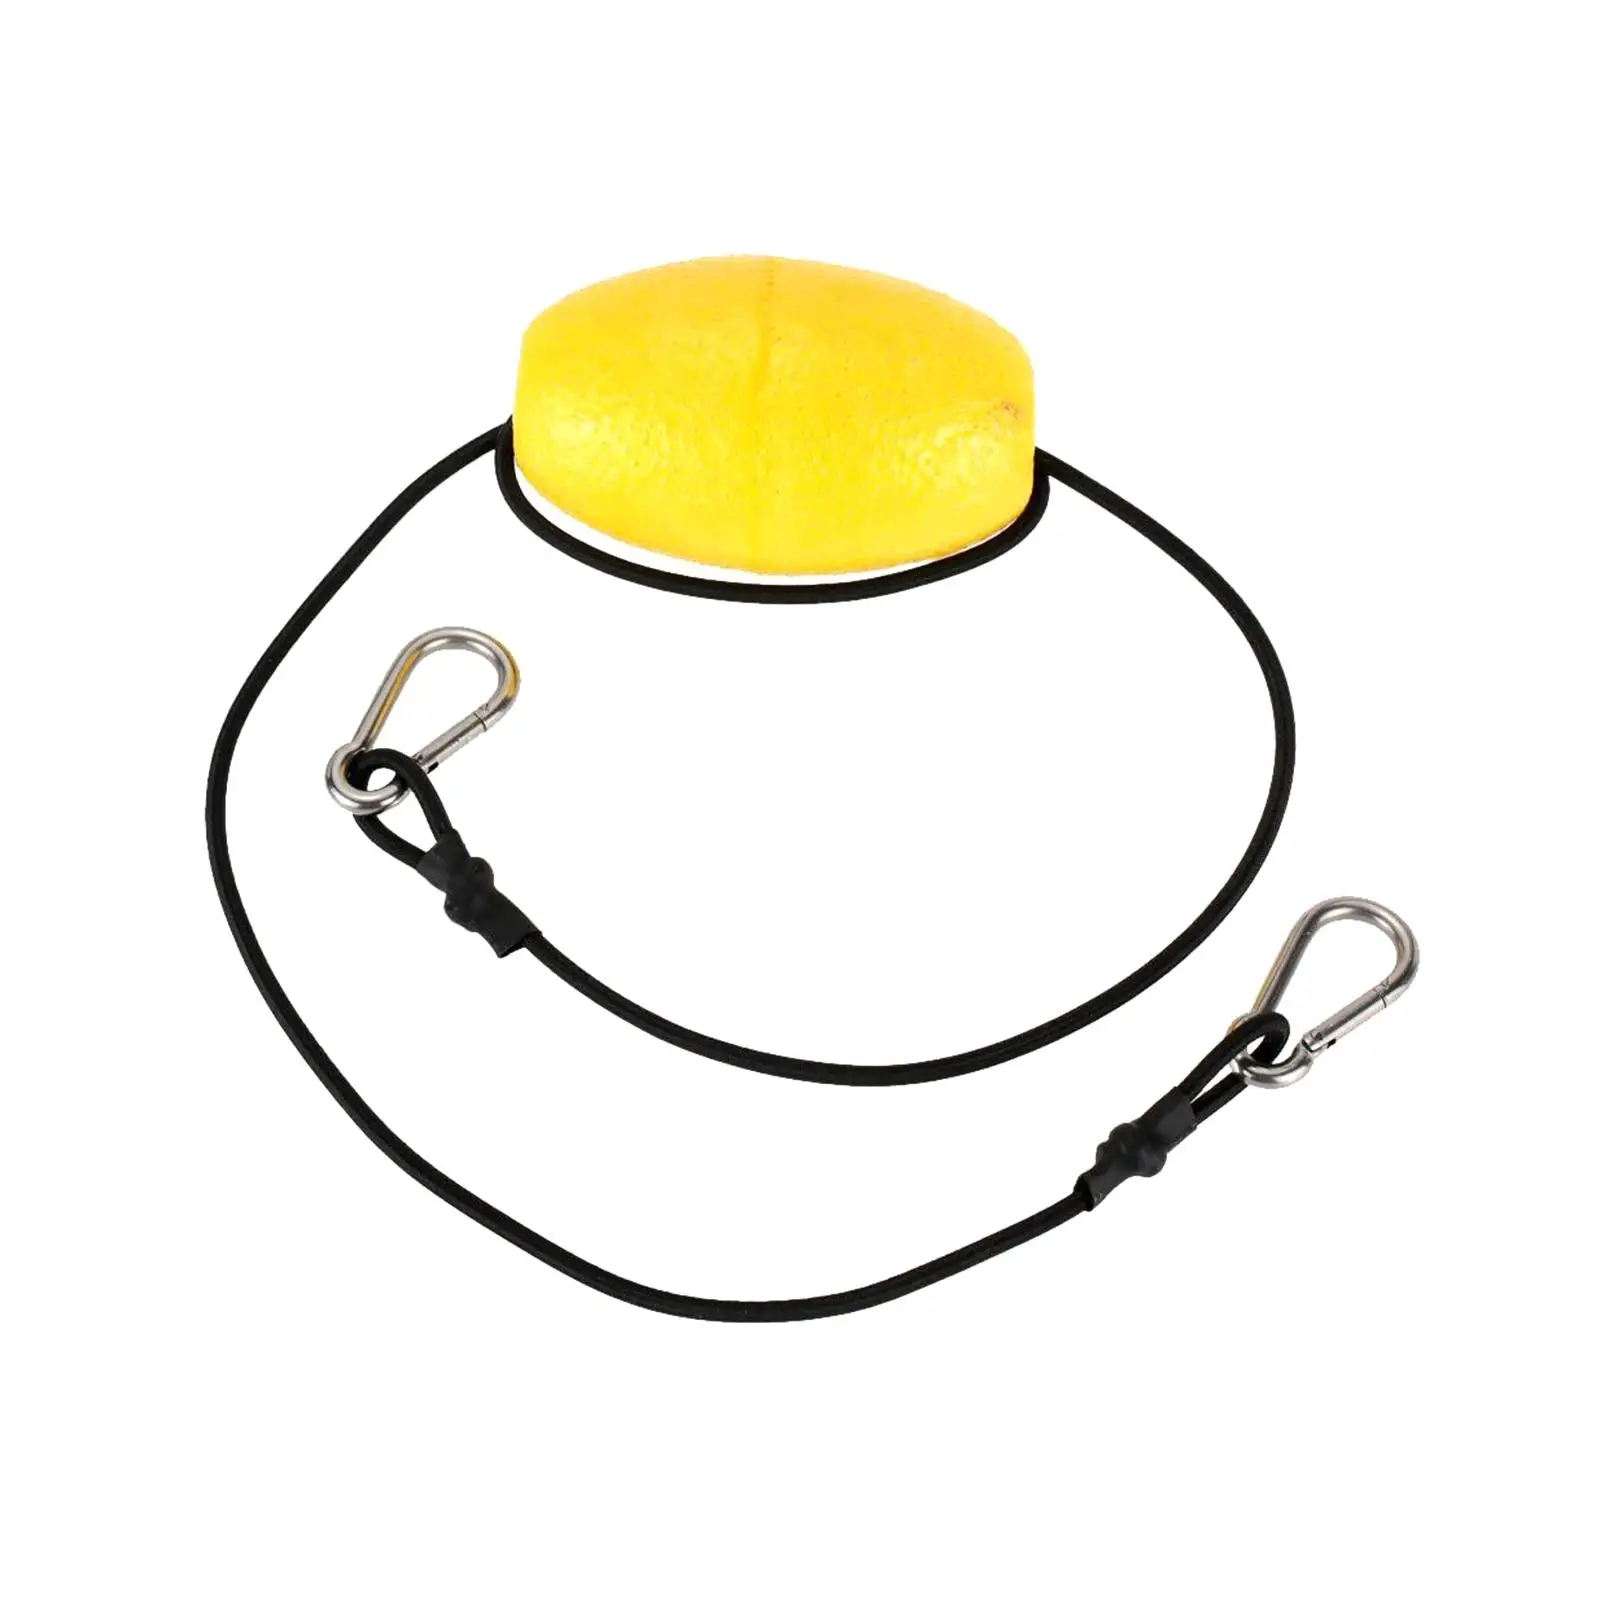 Kayak Tow Throw Line Anchor Marker Buoy with Clip Float Rope Drift Anchor Rope Floating for Kayaking Yacht Docking Canoe Boat